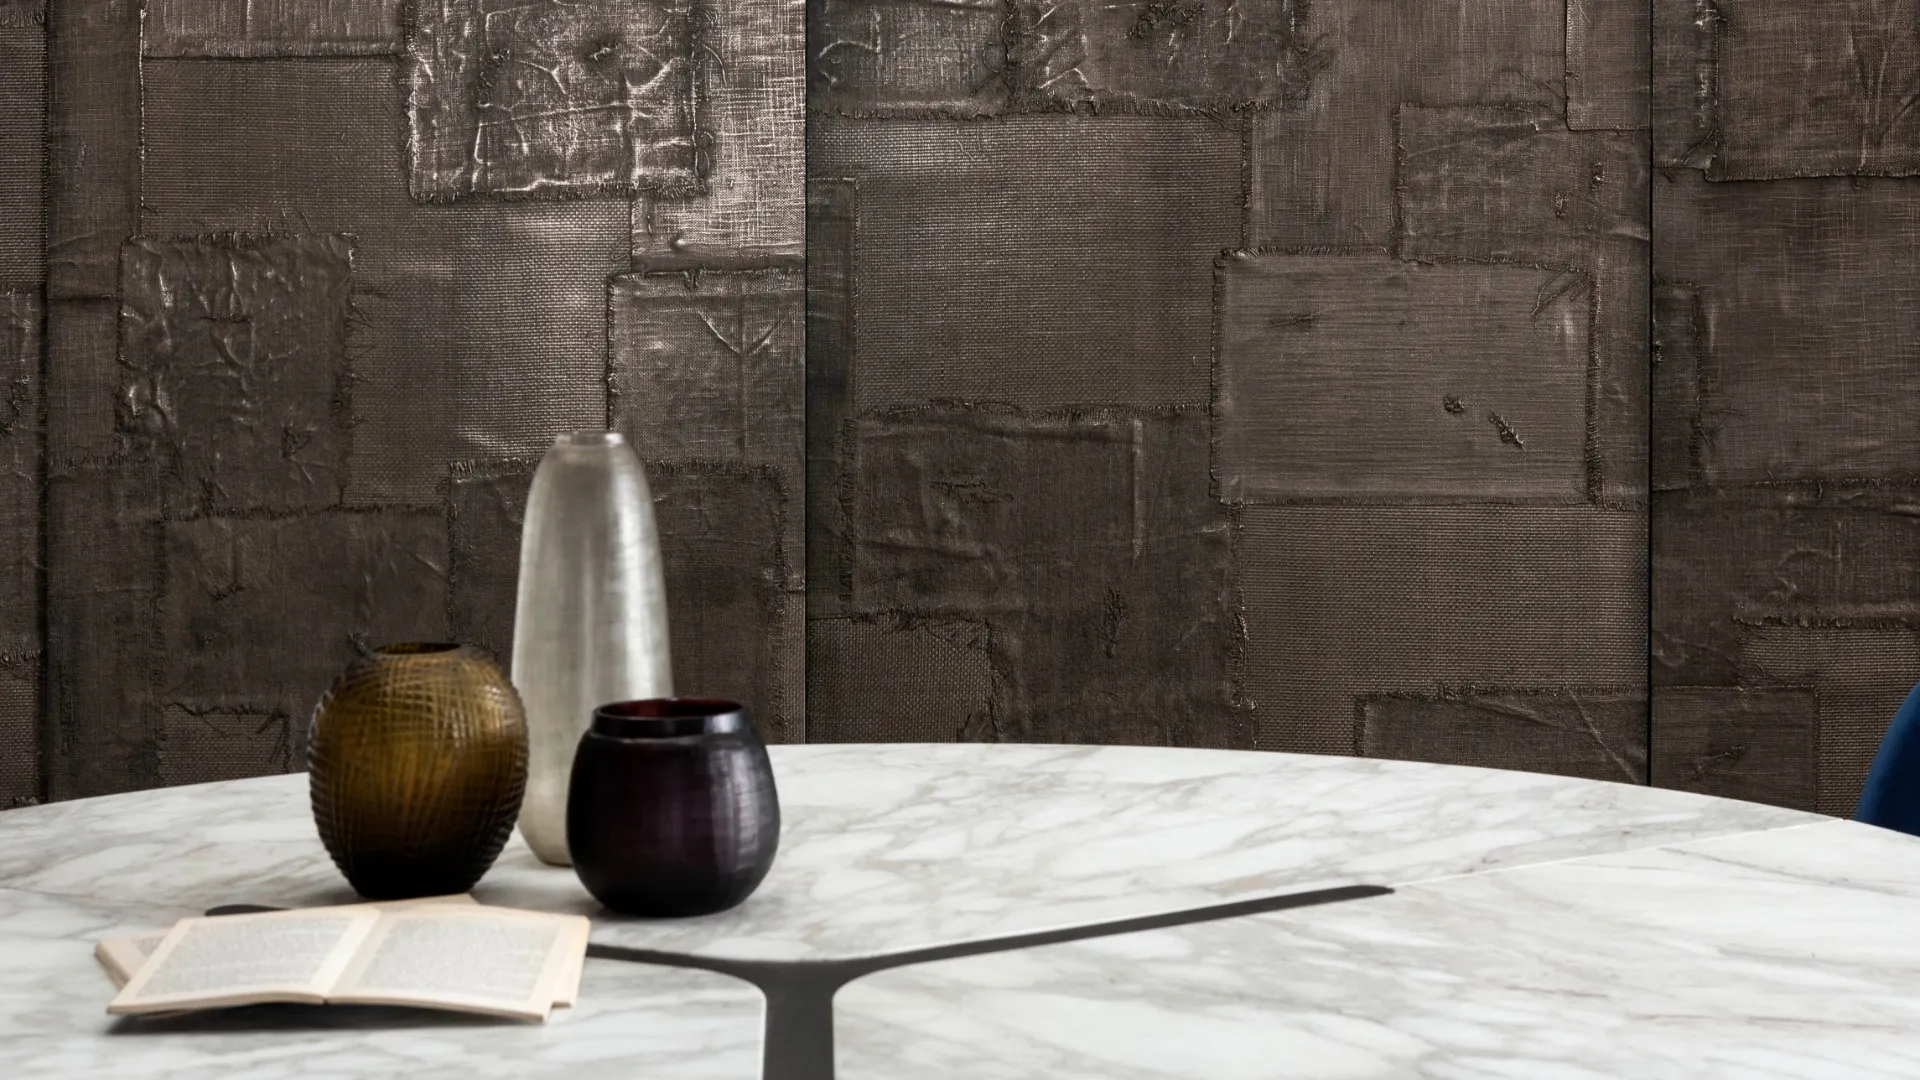 laurameroni luxury wall panels in wood, metal or fabric for high end integrated systems